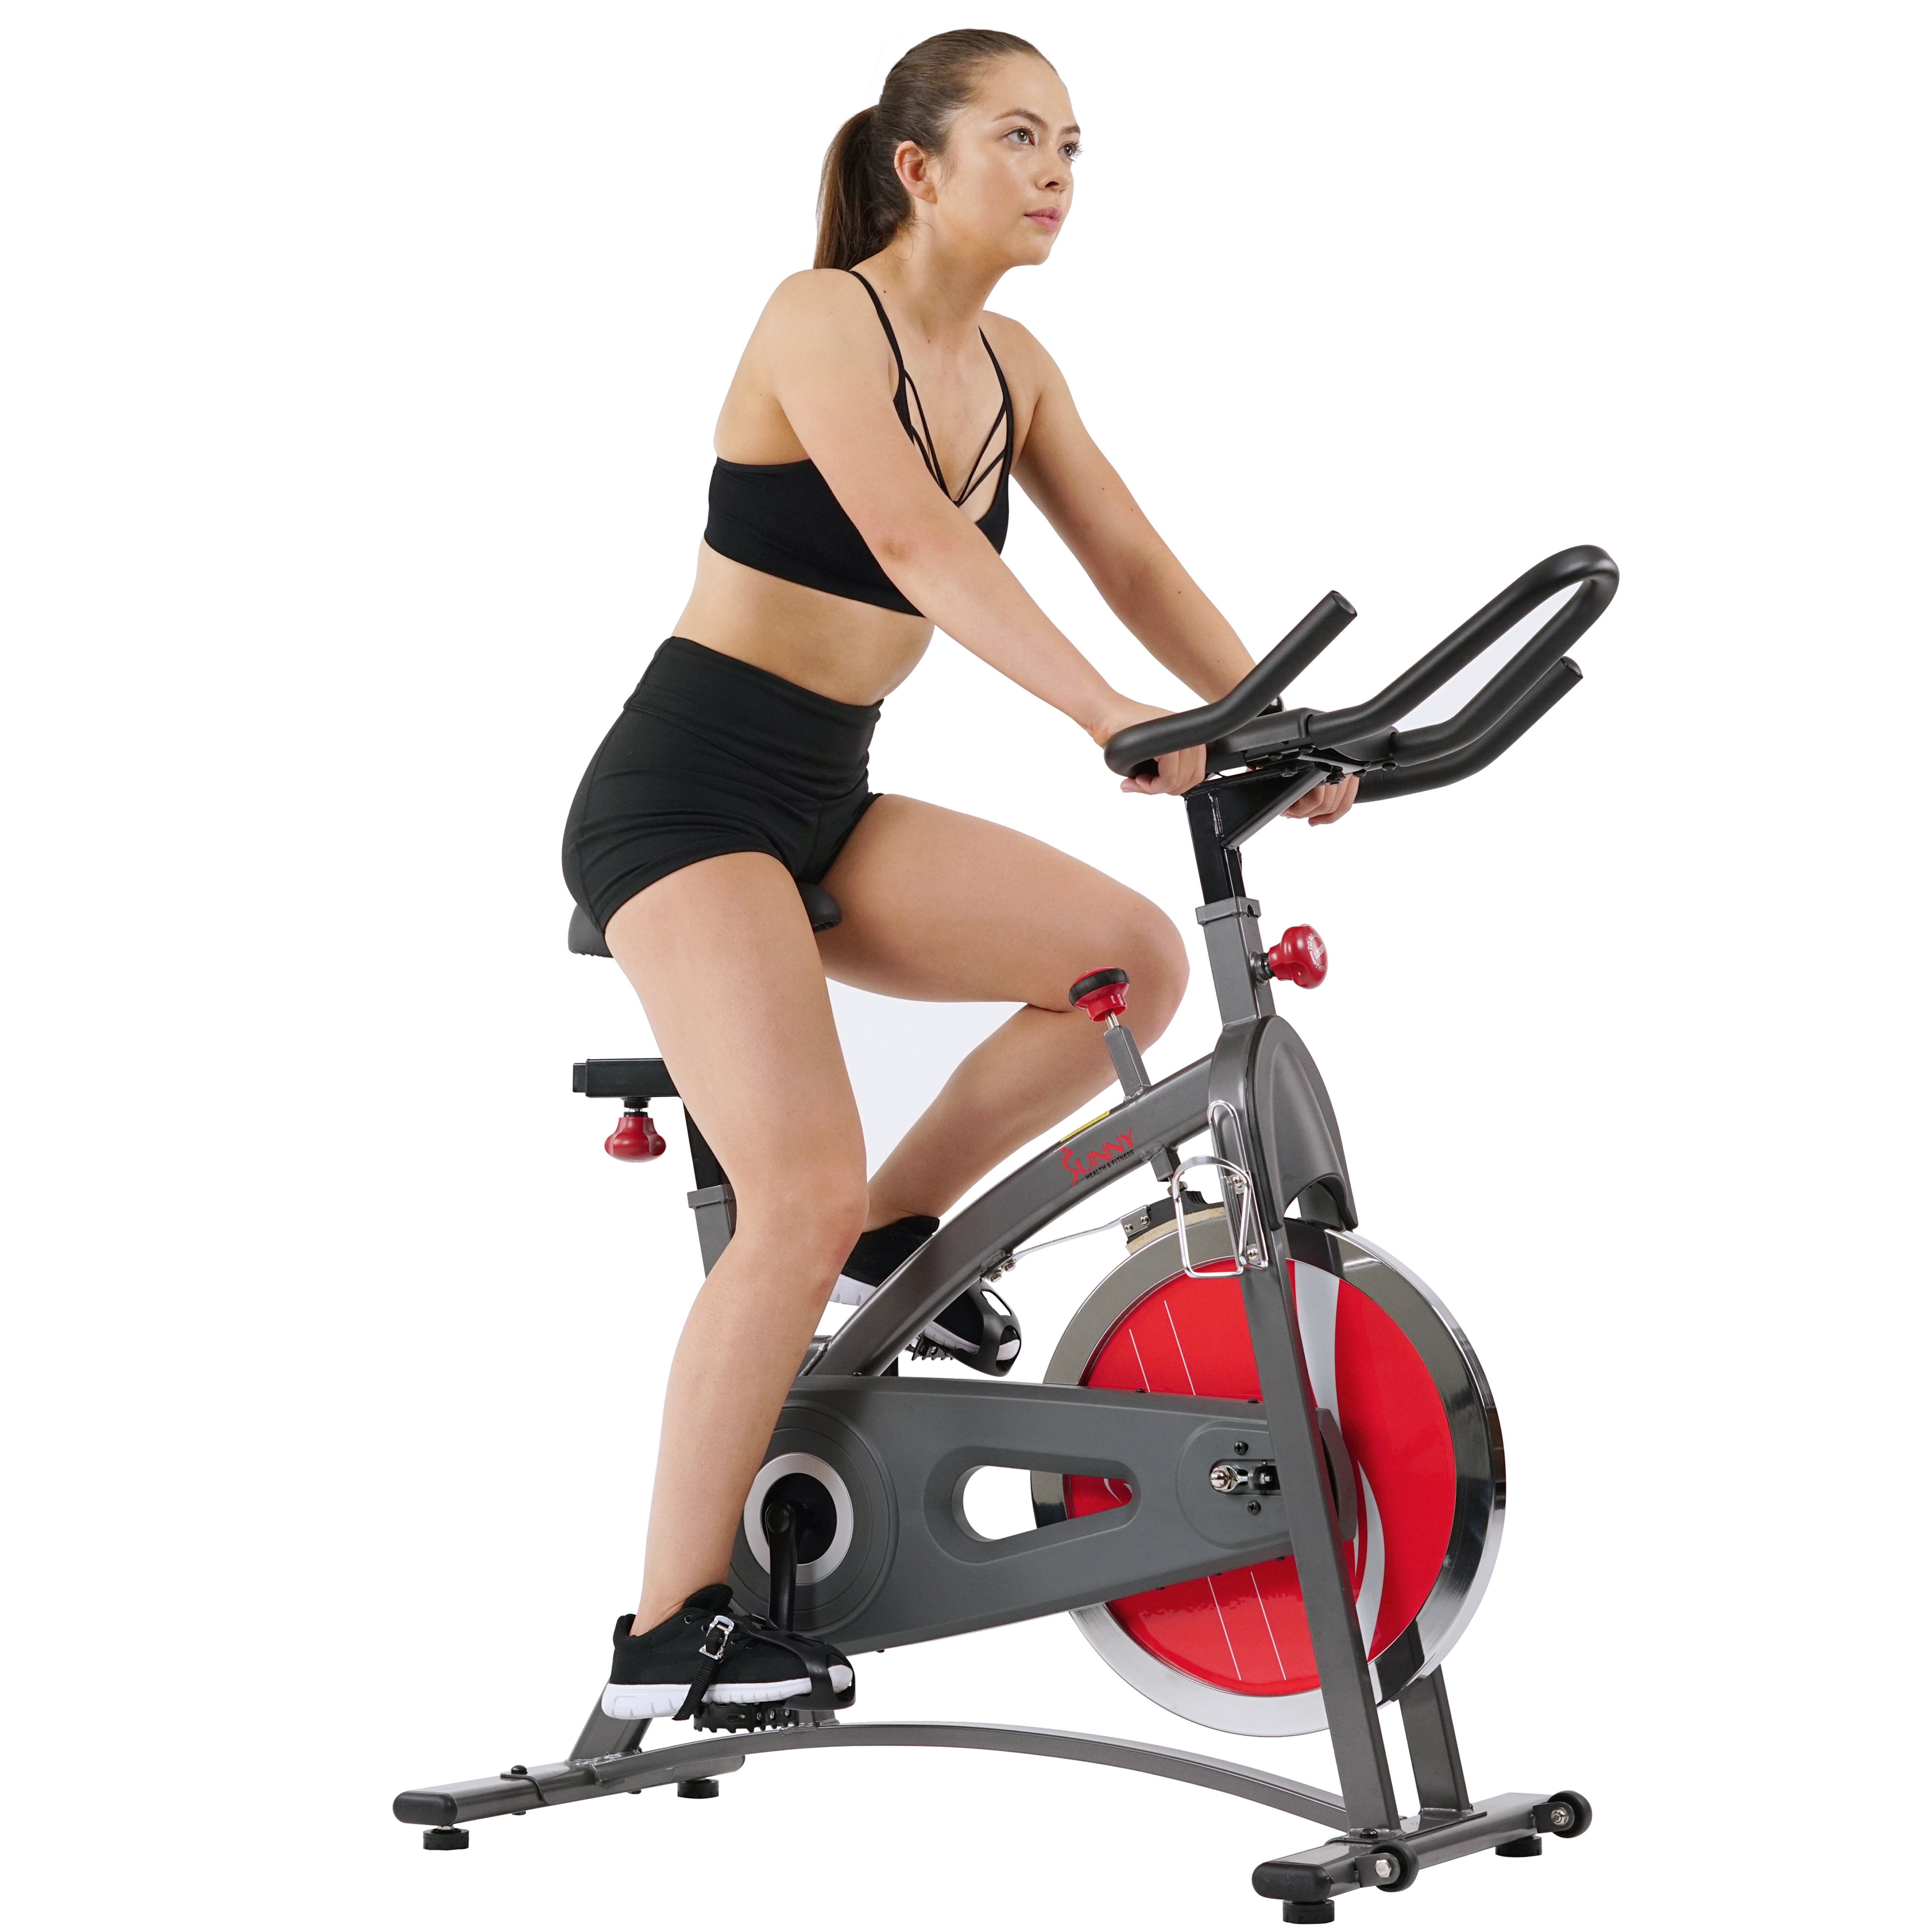 Sunny Health & Fitness SF-B1423 Belt Drive Indoor Cycling Bike Exercise Bike w/ LCD Monitor - image 4 of 7